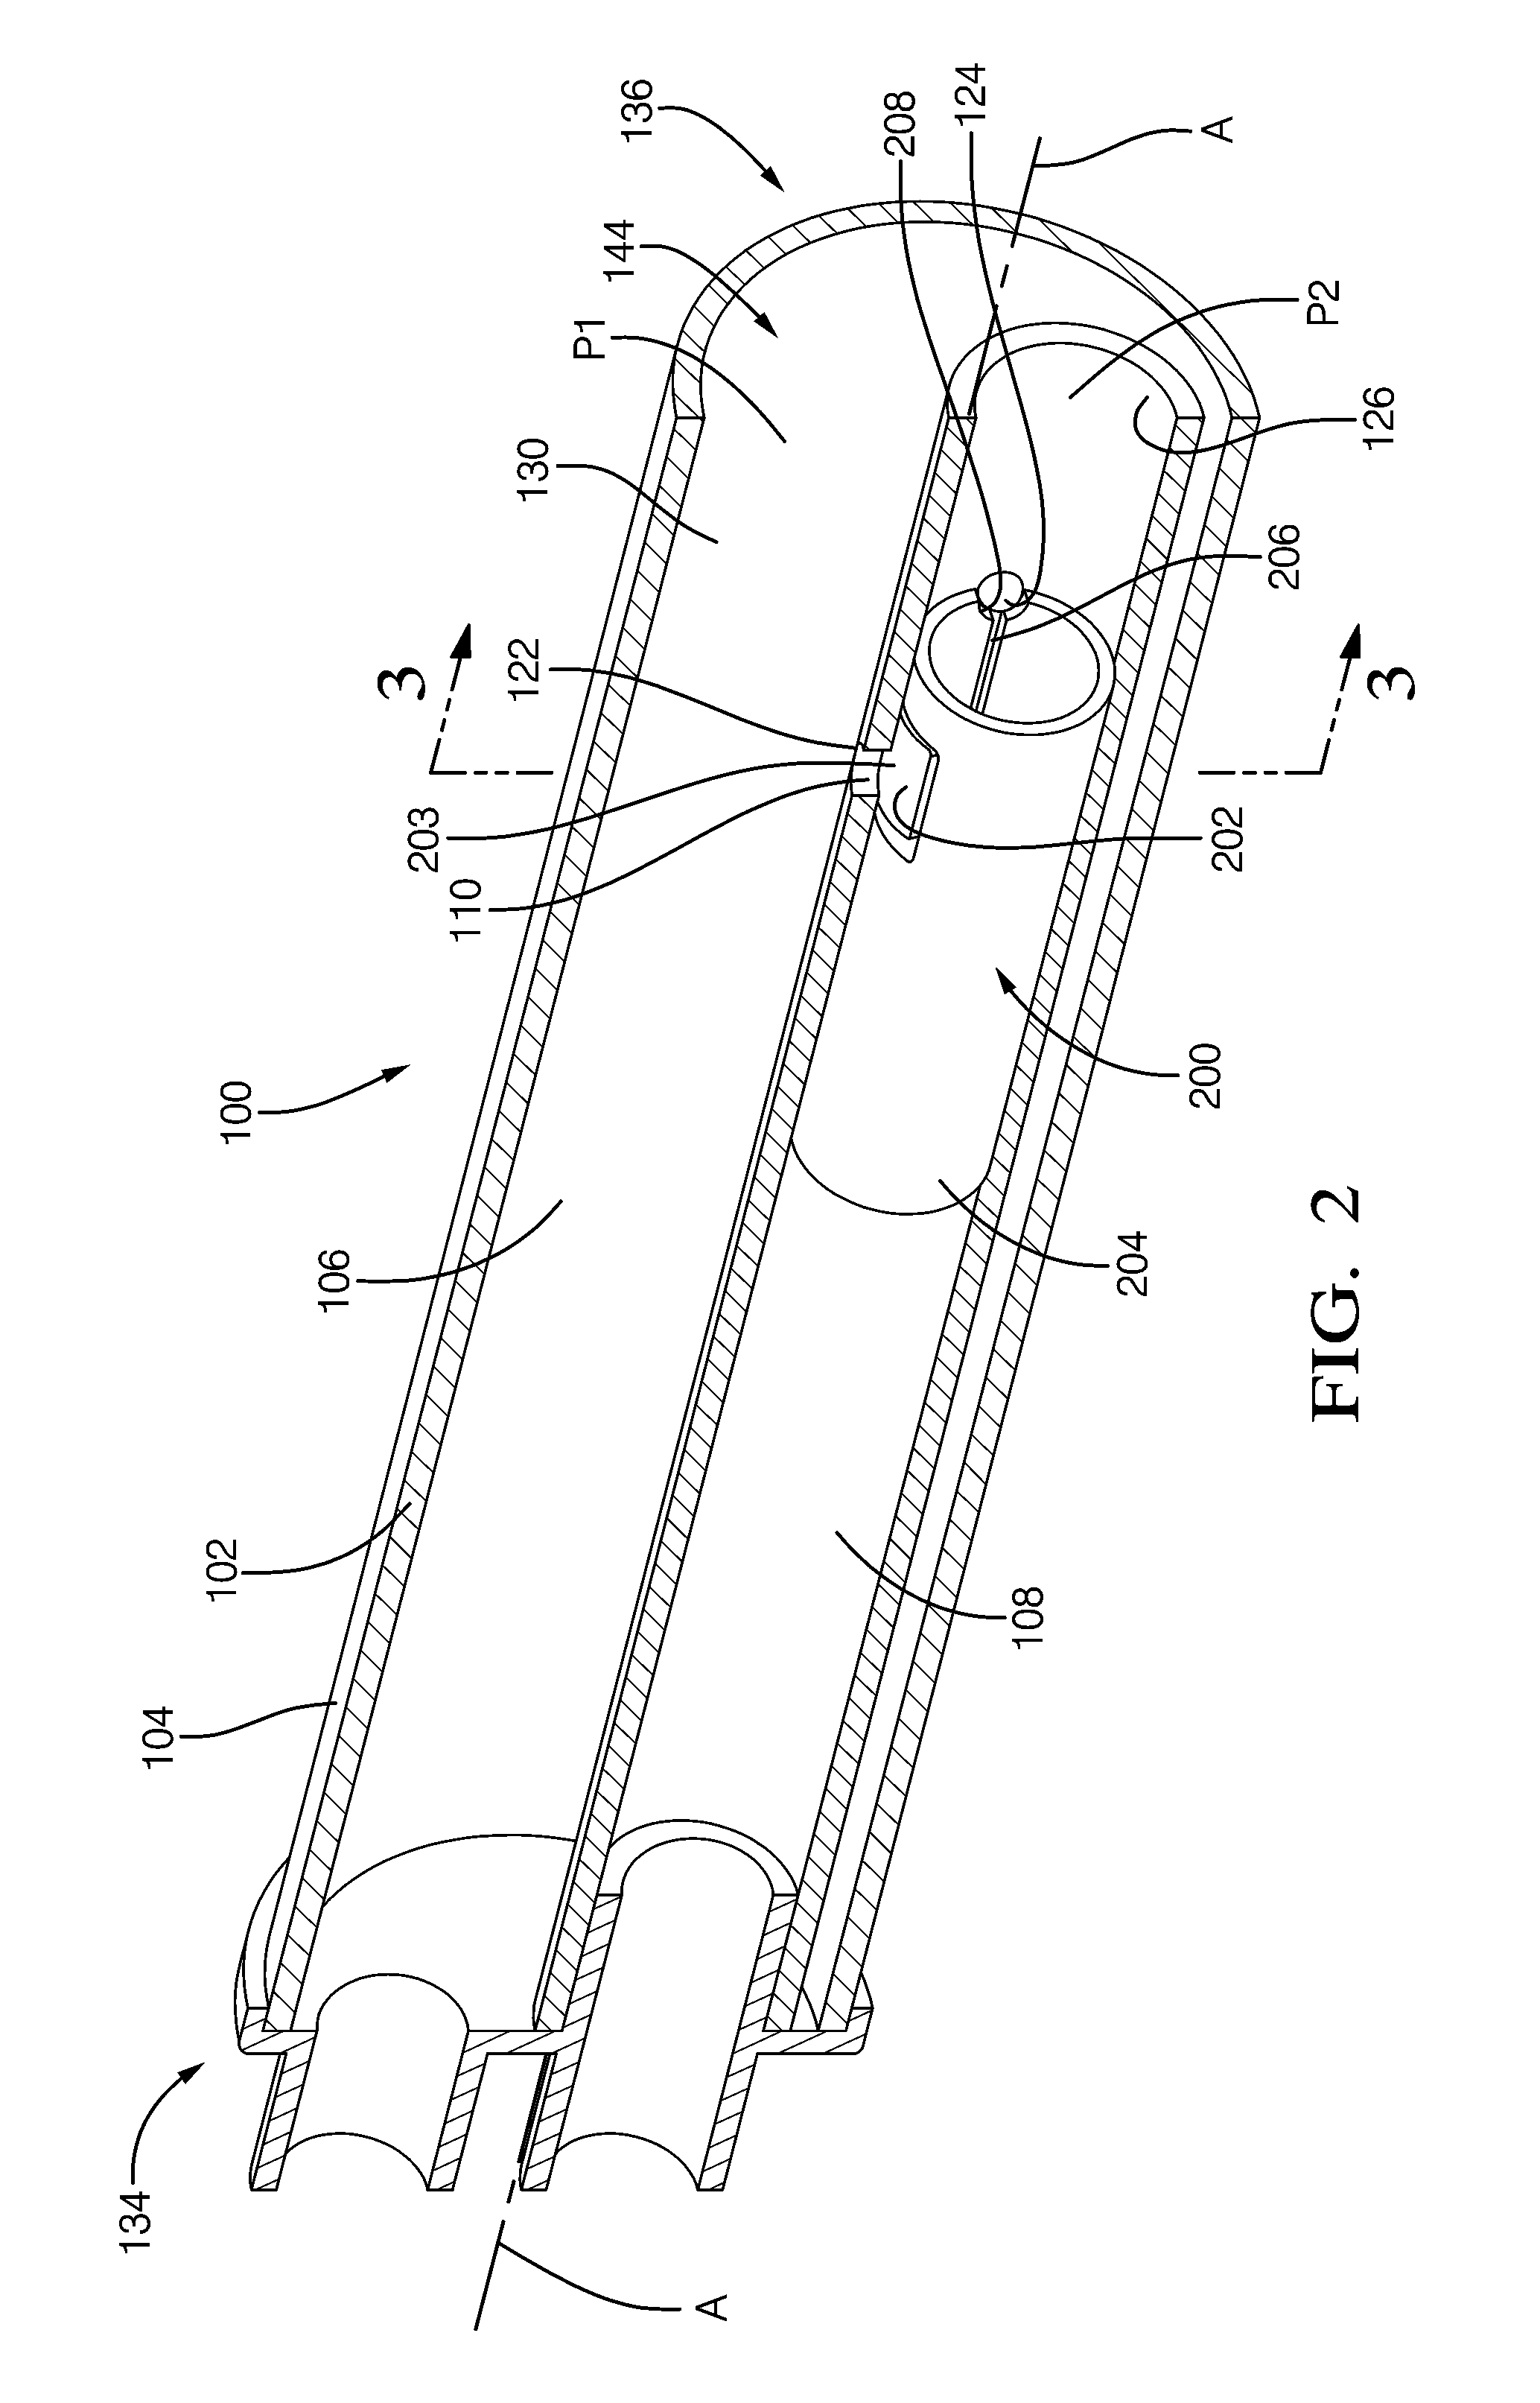 Air conditioning system having an improved internal heat exchanger